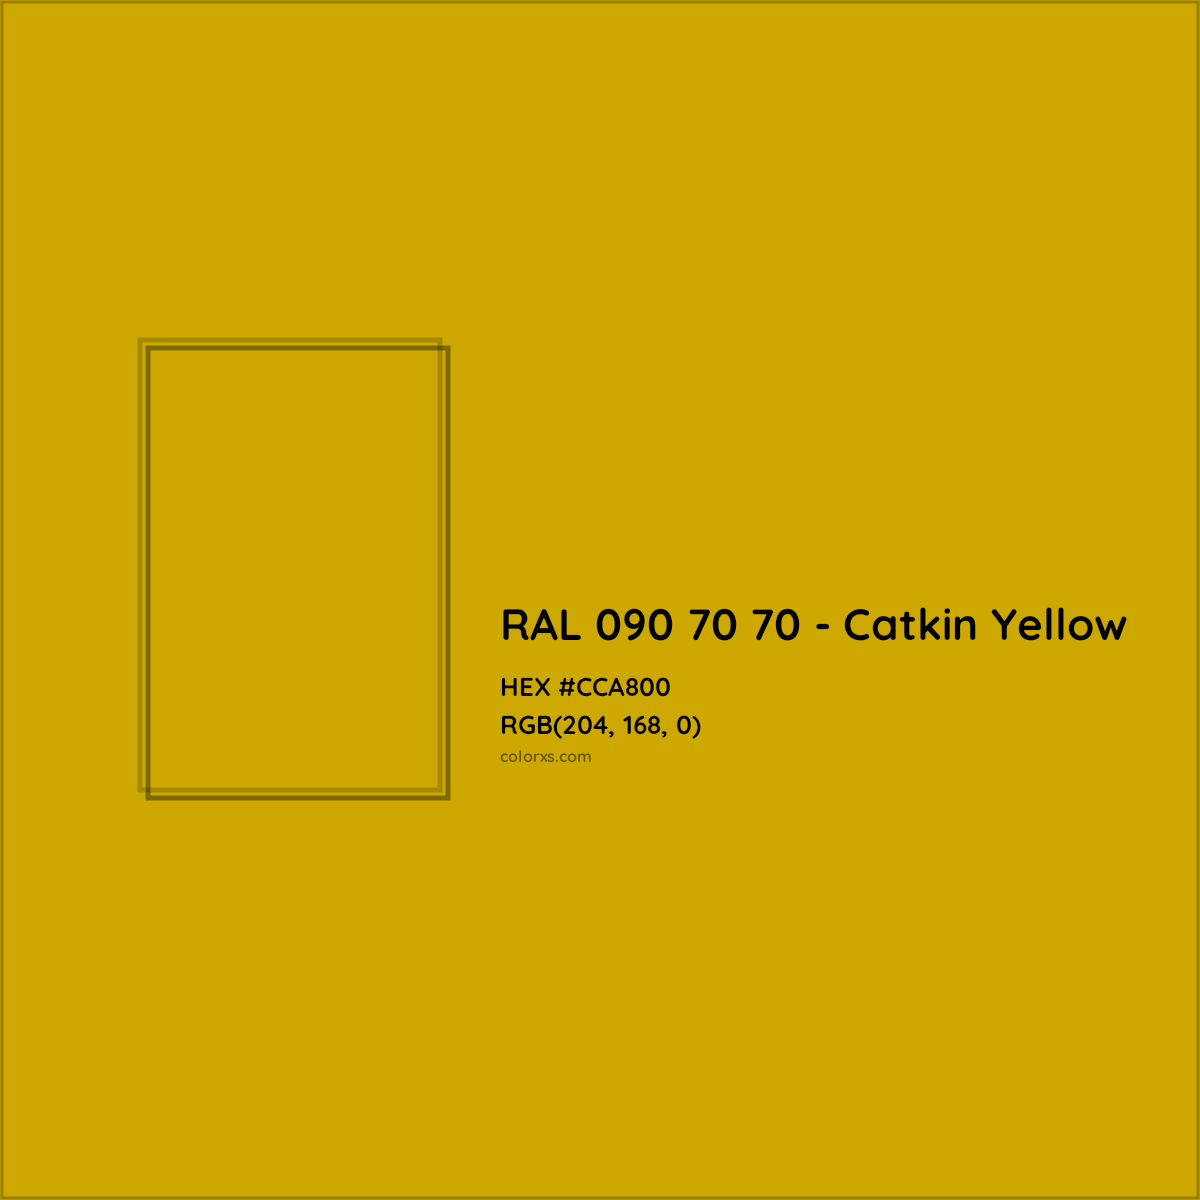 HEX #CCA800 RAL 090 70 70 - Catkin Yellow CMS RAL Design - Color Code